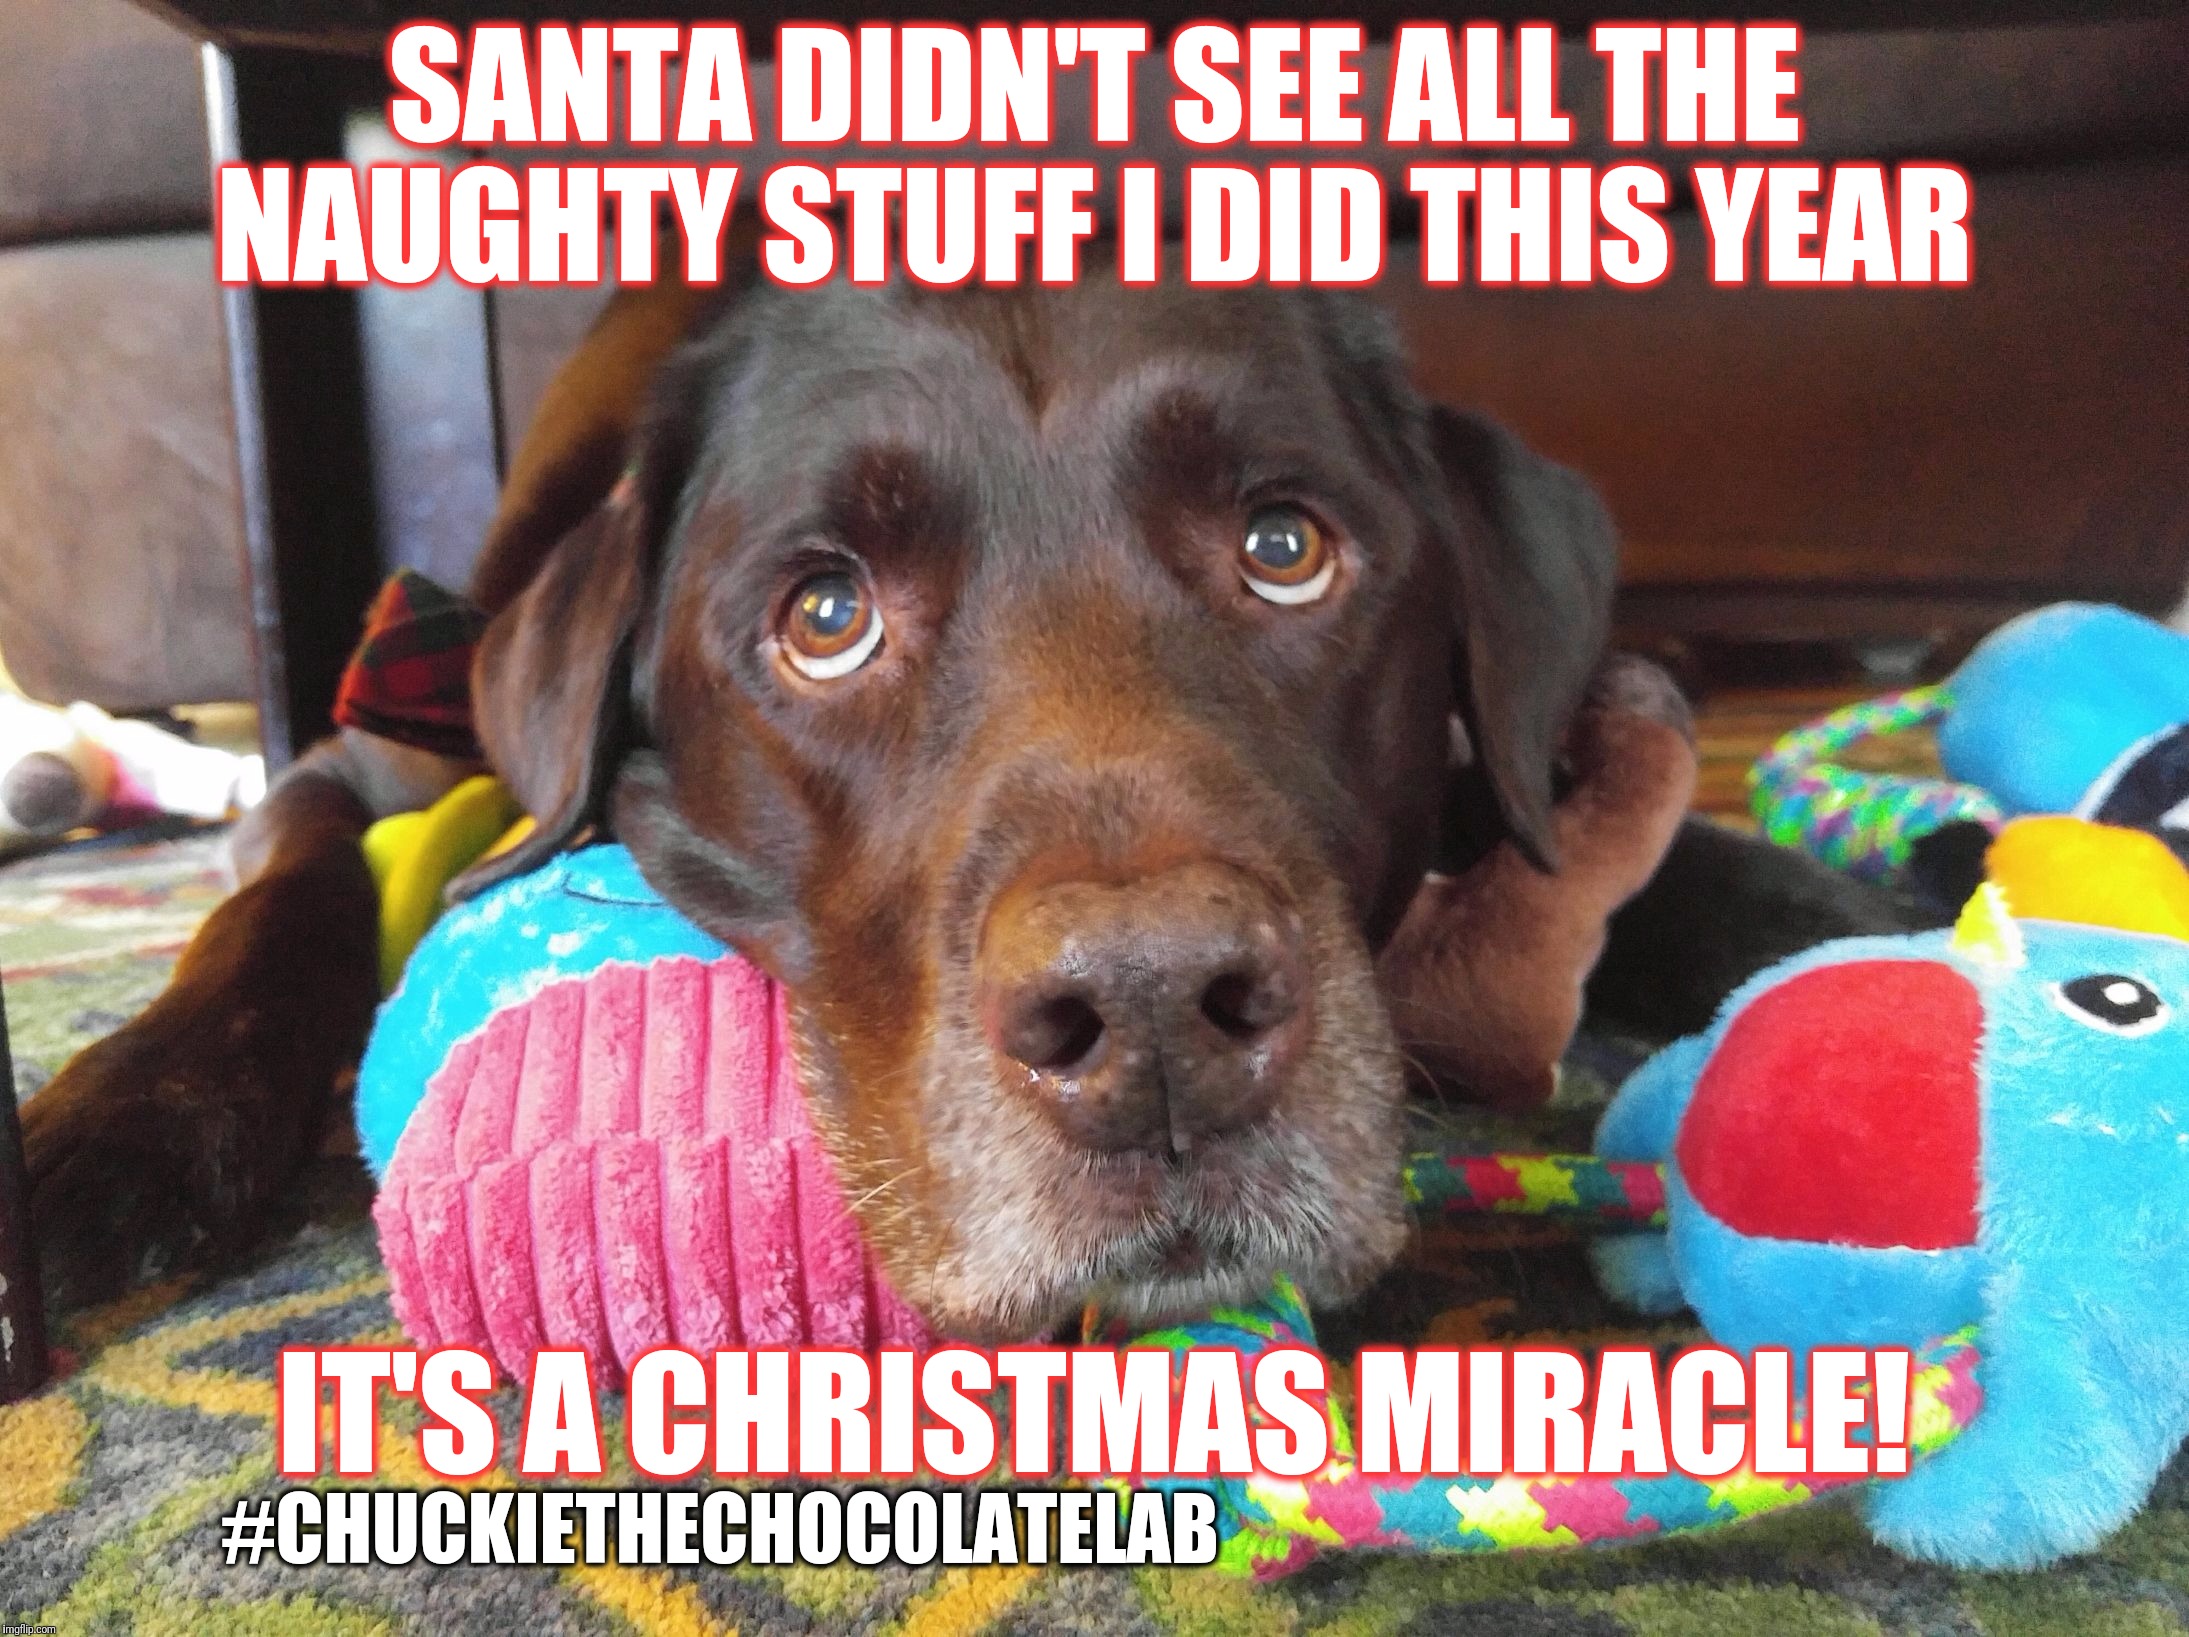 It's a Christmas miracle  | SANTA DIDN'T SEE ALL THE NAUGHTY STUFF I DID THIS YEAR; IT'S A CHRISTMAS MIRACLE! #CHUCKIETHECHOCOLATELAB | image tagged in chuckie the chocolate lab,christmas memes,christmas miracle,christmas dogs,funny,dogs | made w/ Imgflip meme maker